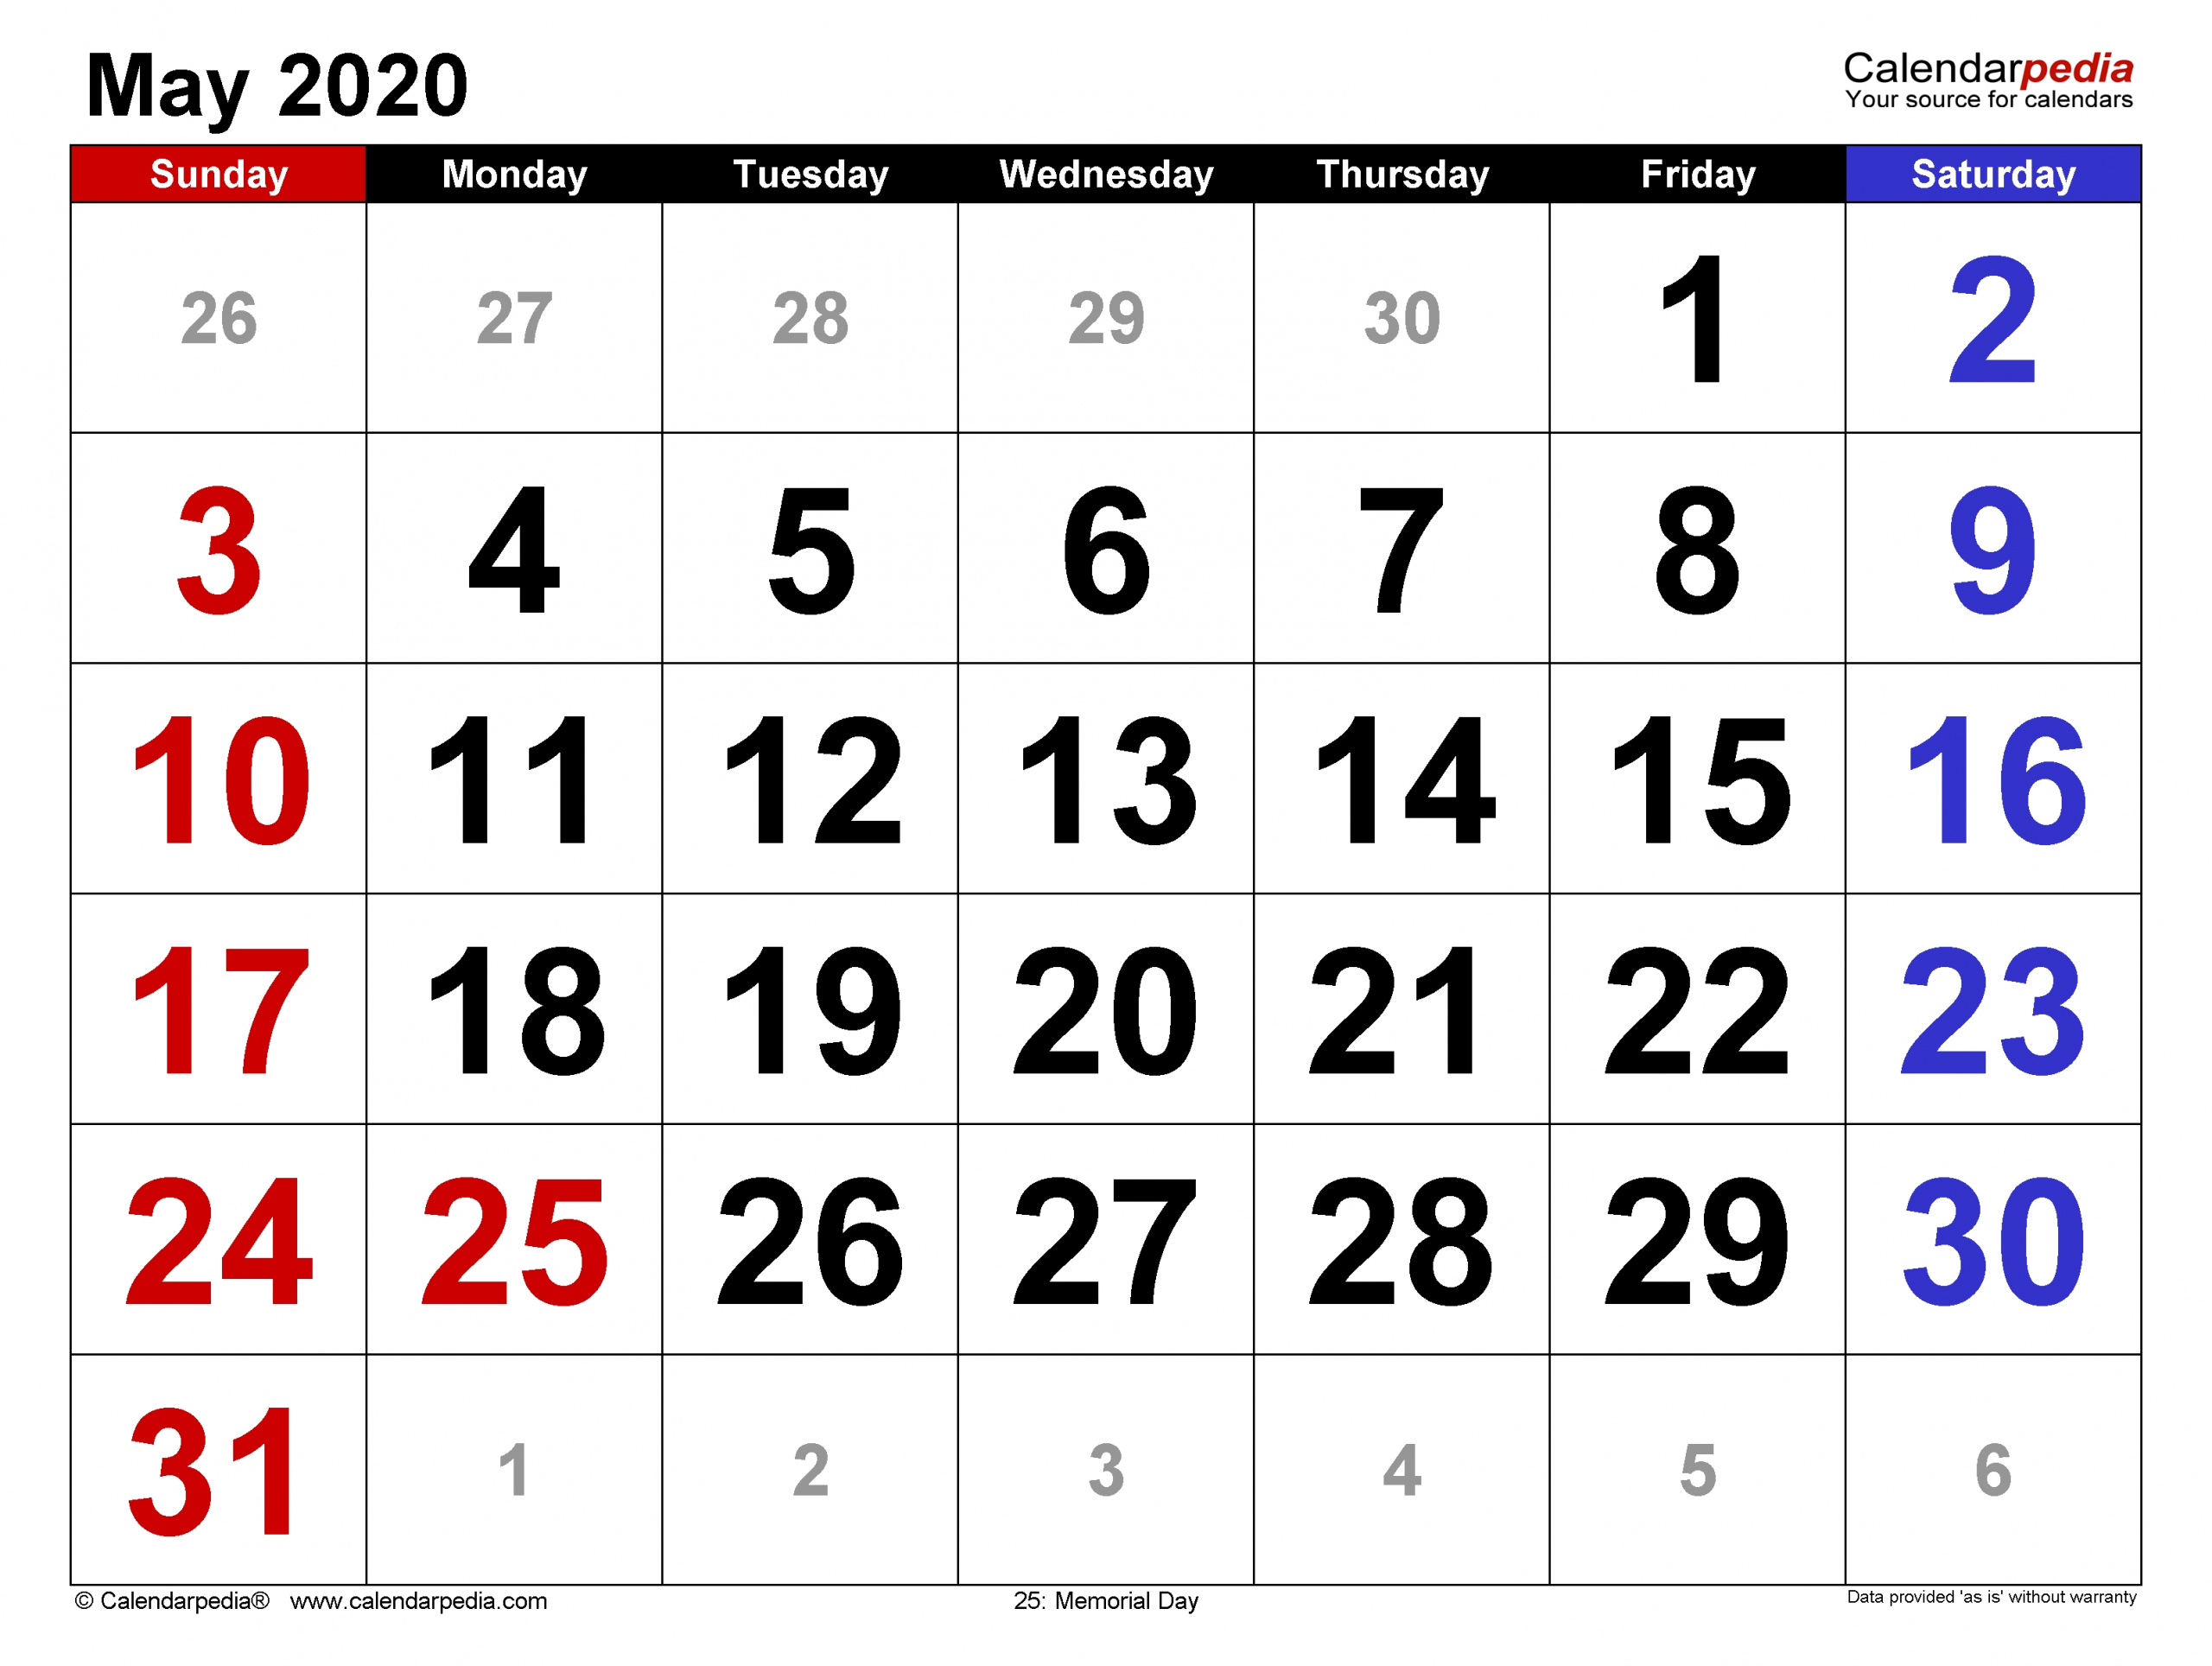 May 2020 Calendar | Templates For Word, Excel And Pdf-Big Calendar 2021 Template To Fill Out